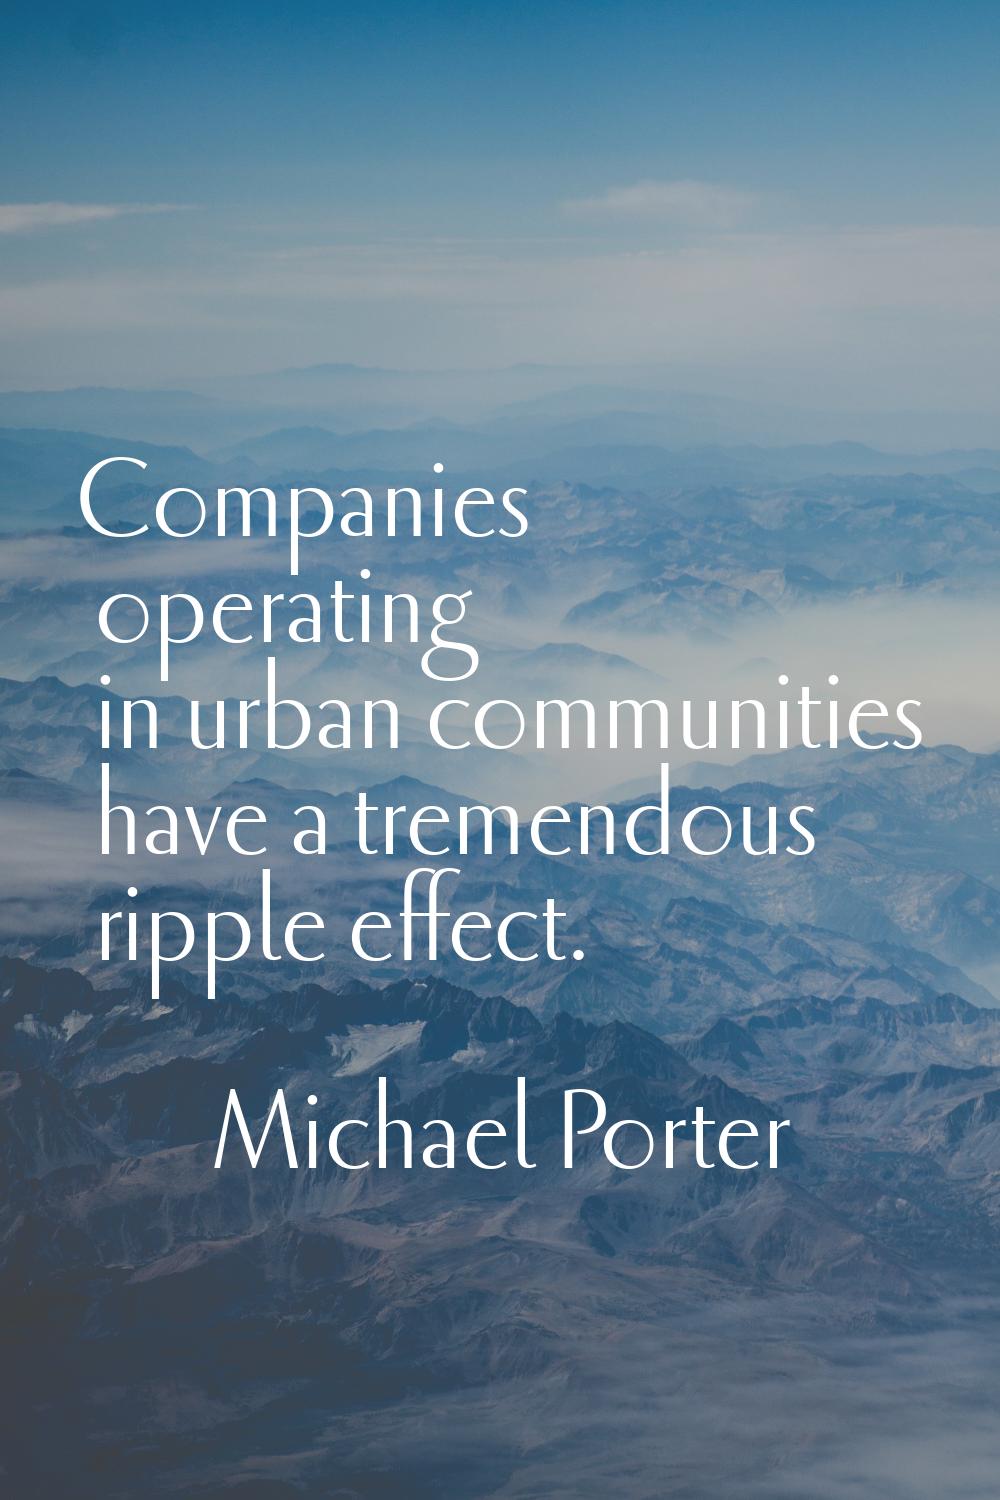 Companies operating in urban communities have a tremendous ripple effect.